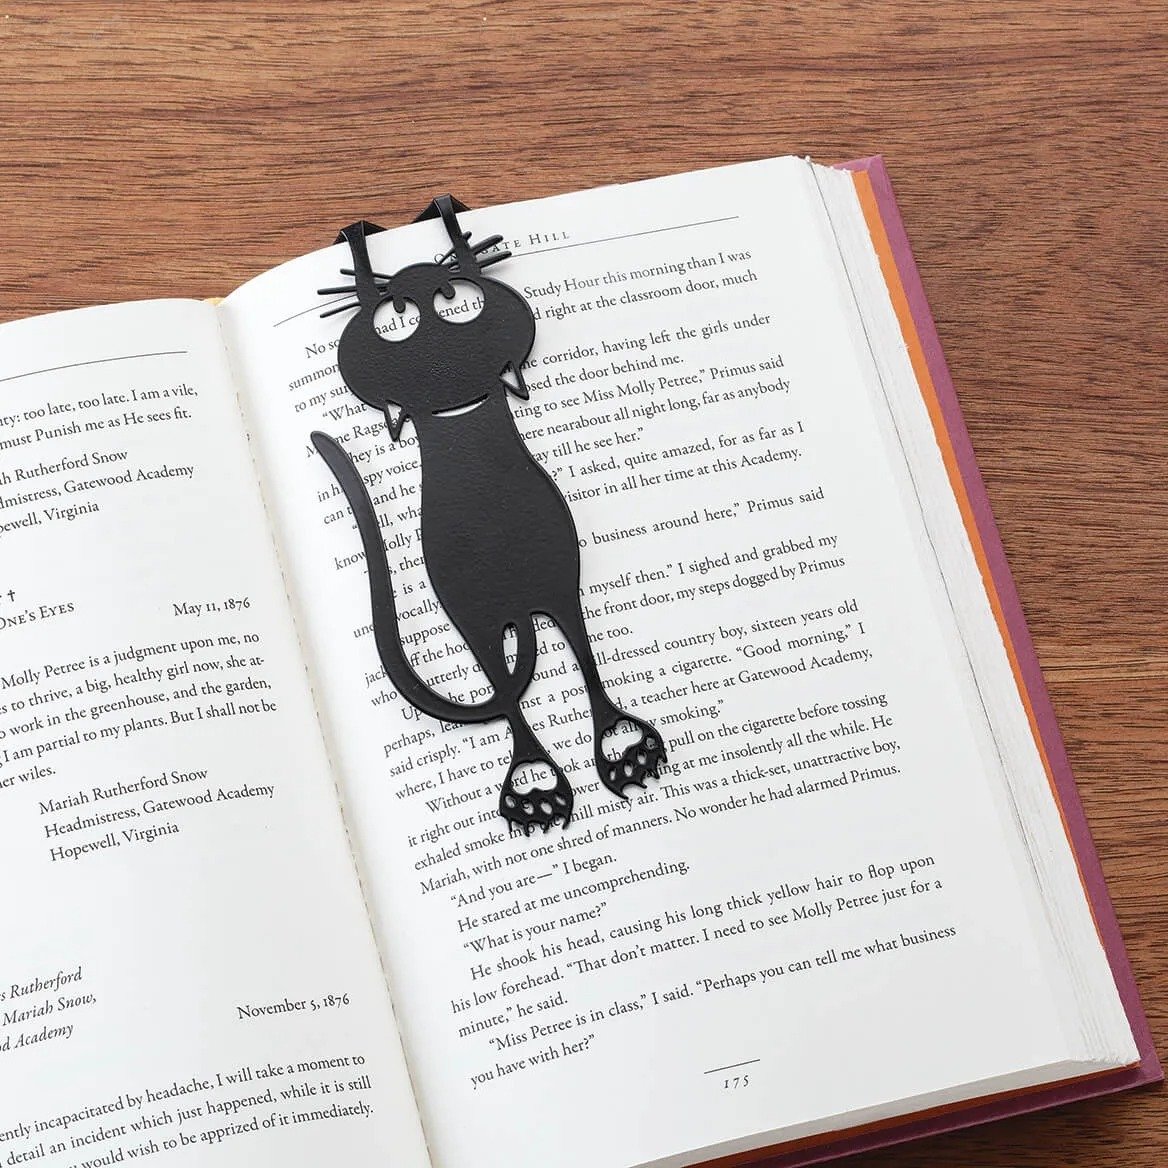 😸Funny Cat Bookmark- Locate Reading Progress With Cute Cat Paws🐾